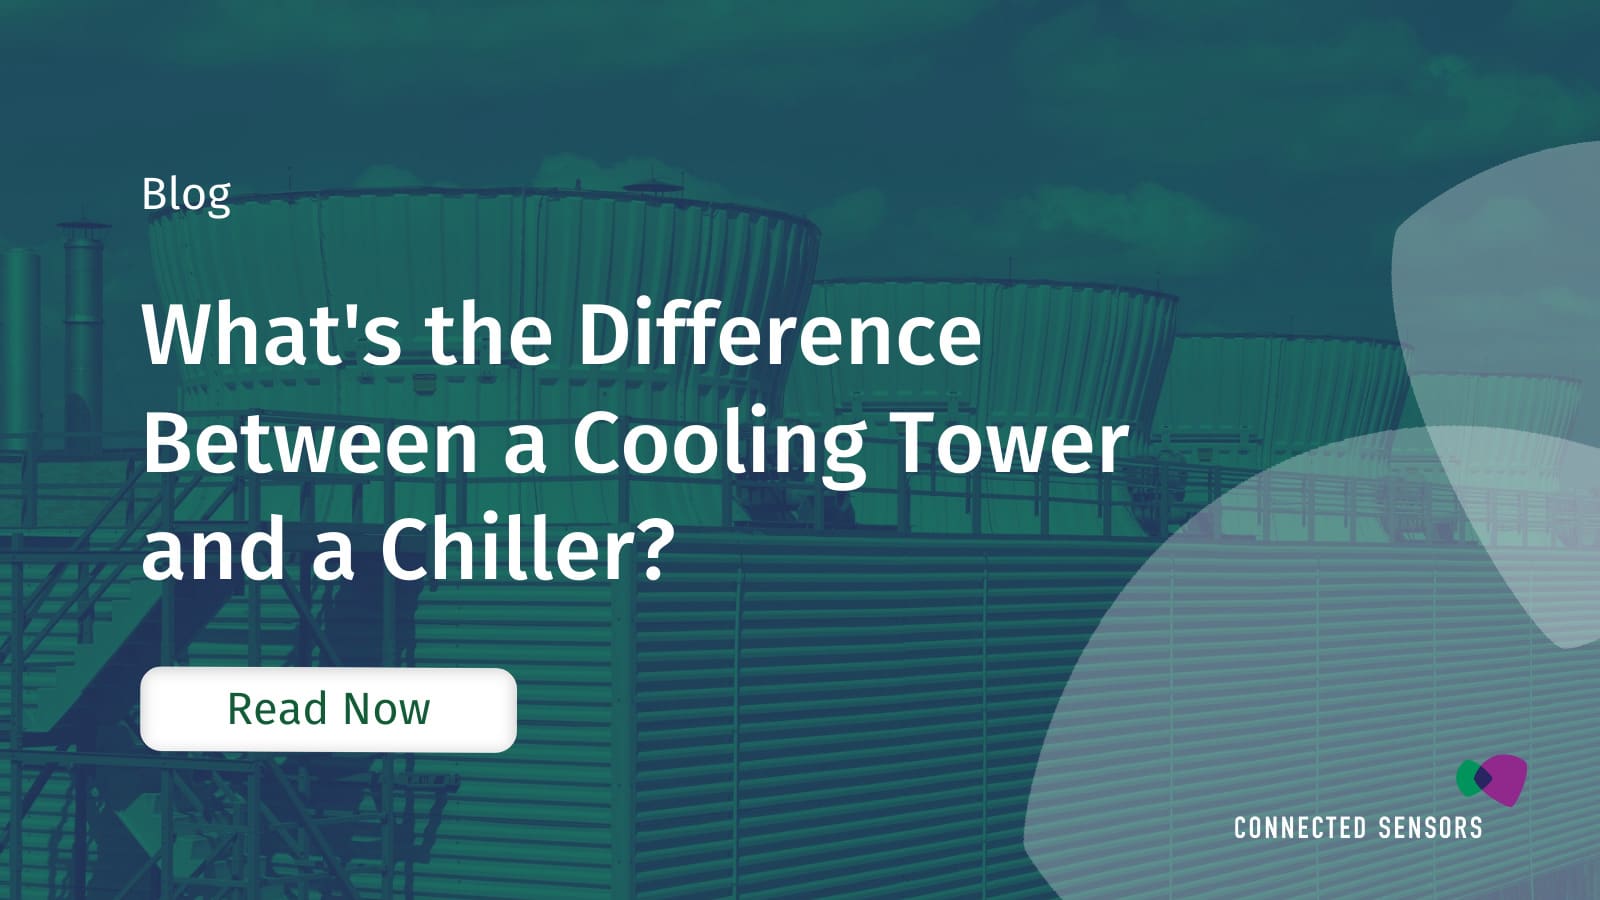 What's the Difference Between a Cooling Tower and a Chiller?